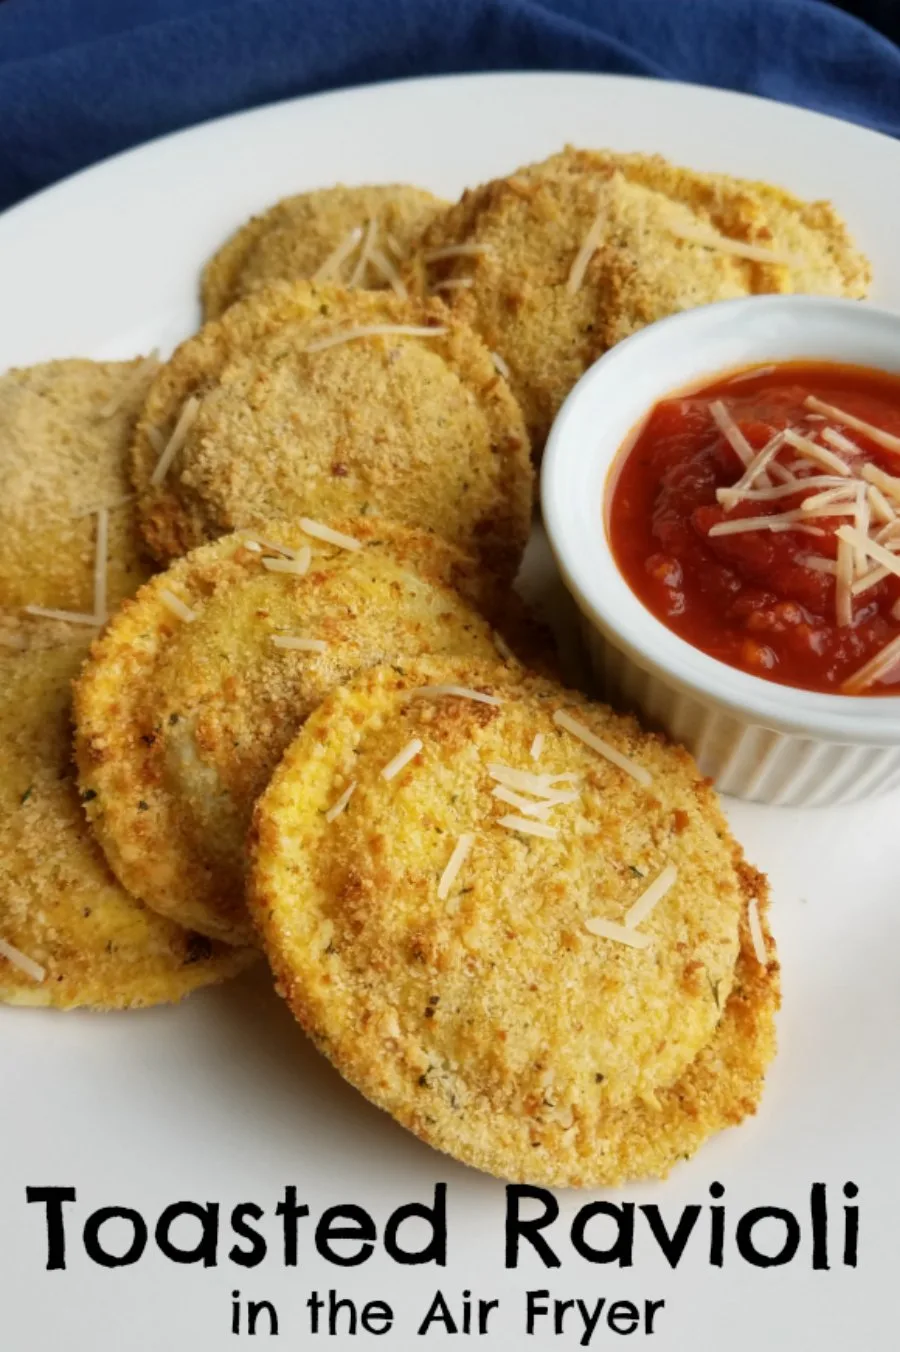 Have you ever had toasted ravioli? They are a classic in the St. Louis area, so naturally being located so close we are familiar with them as well. Get those golden crispy appetizers at home without the mess or smell of frying. Make them in an air fryer instead!